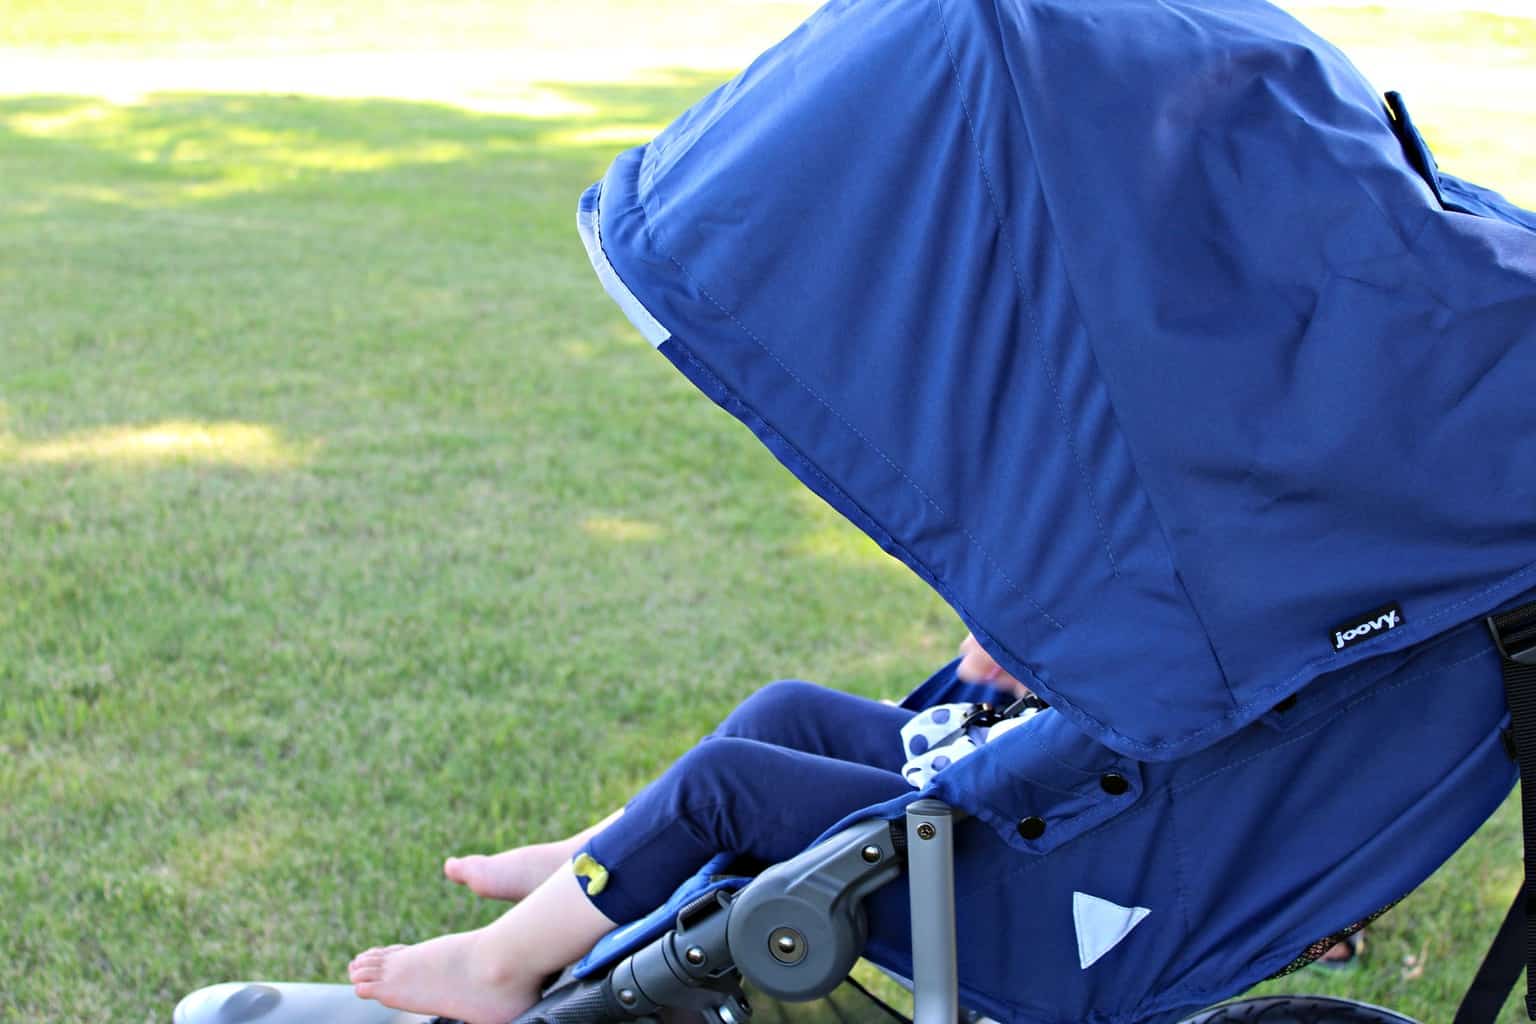 Joovy Zoom360 Ultralight Jogging Stroller - Feature-packed, value priced, and weighing in at 26.25 lbs, the Zoom360 Ultralight is simpler, stronger and better performing. Carries a child up to 75 lbs. {Thrifty Nifty Mommy}